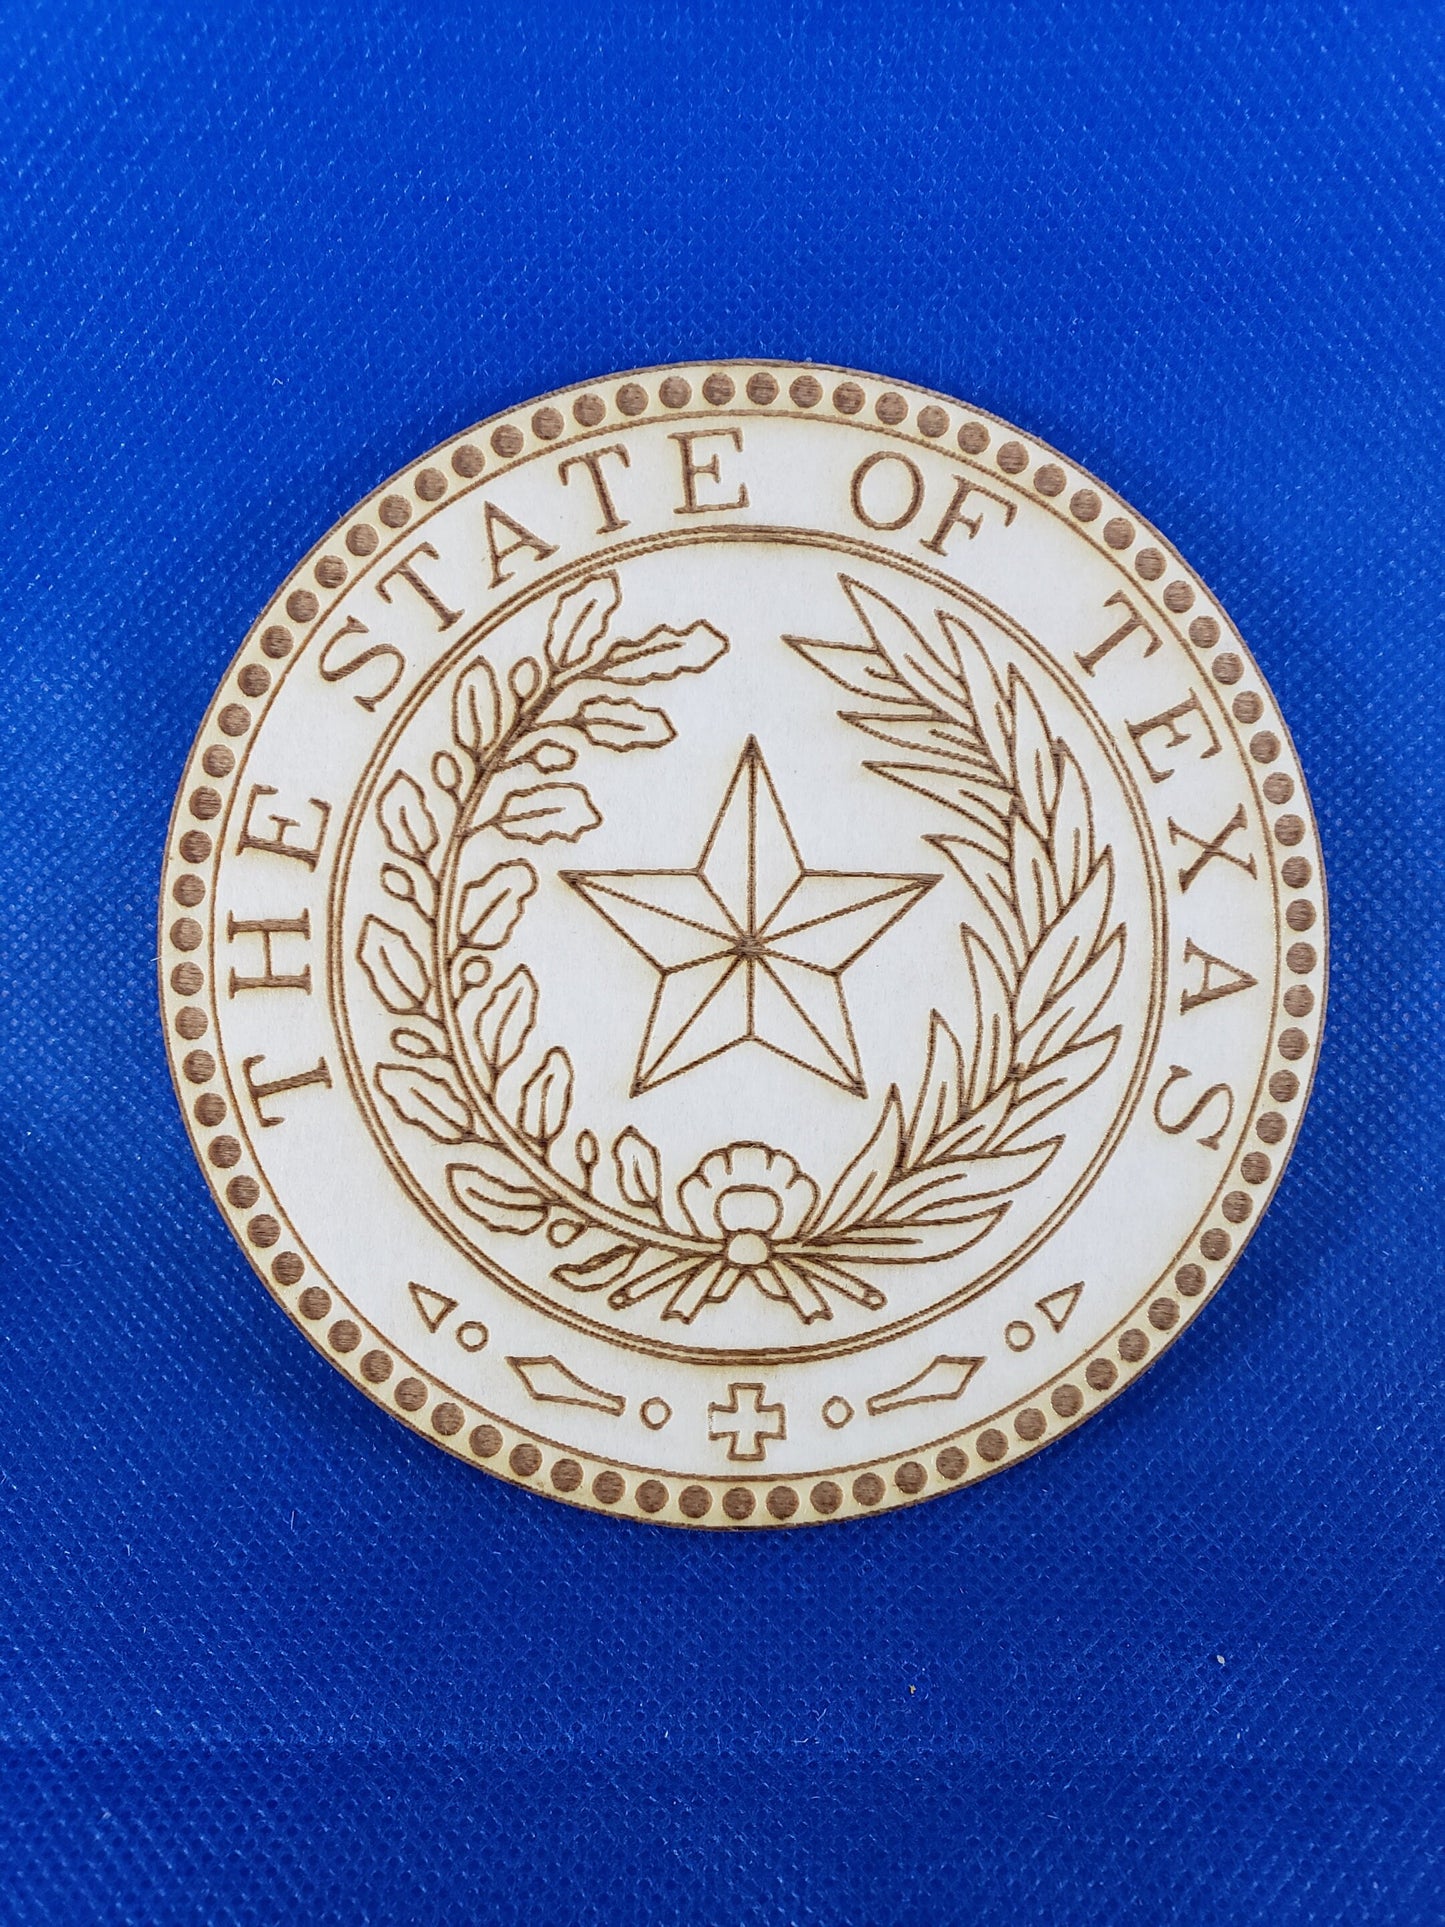 Texas State Seal - Laser cut natural wooden blanks